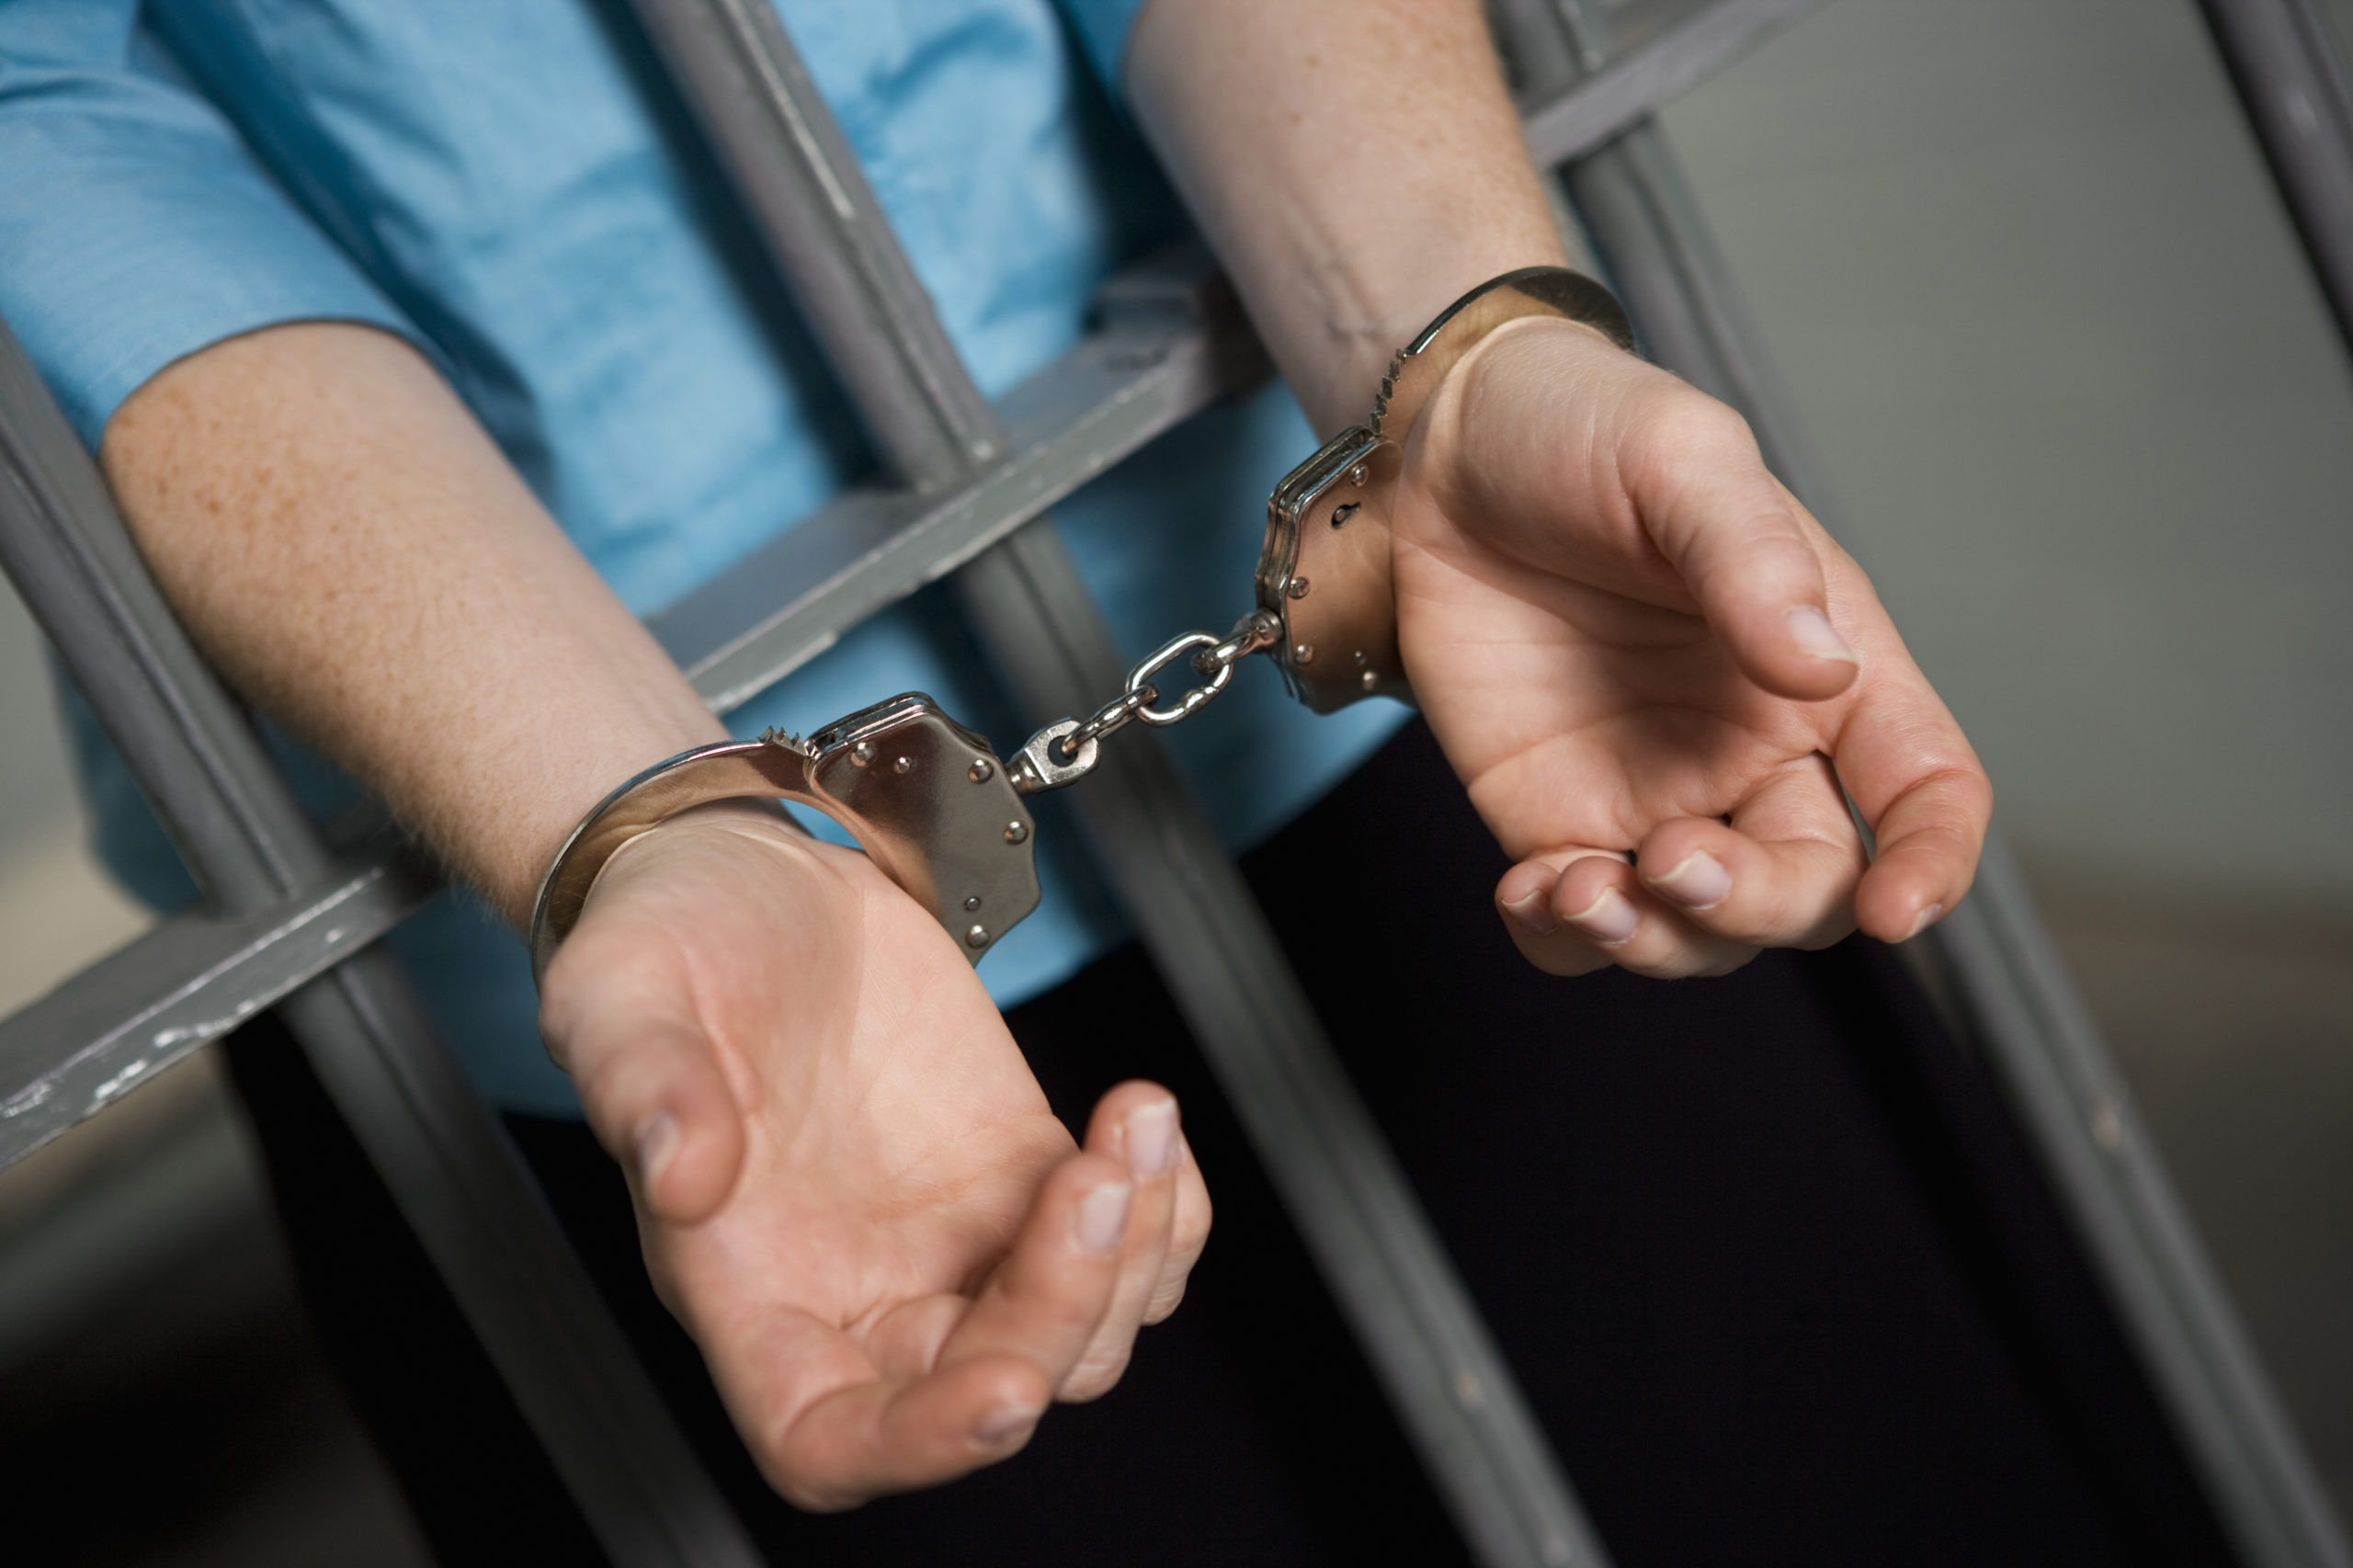 3 Steps To Take If There Is A Warrant For Your Arrest